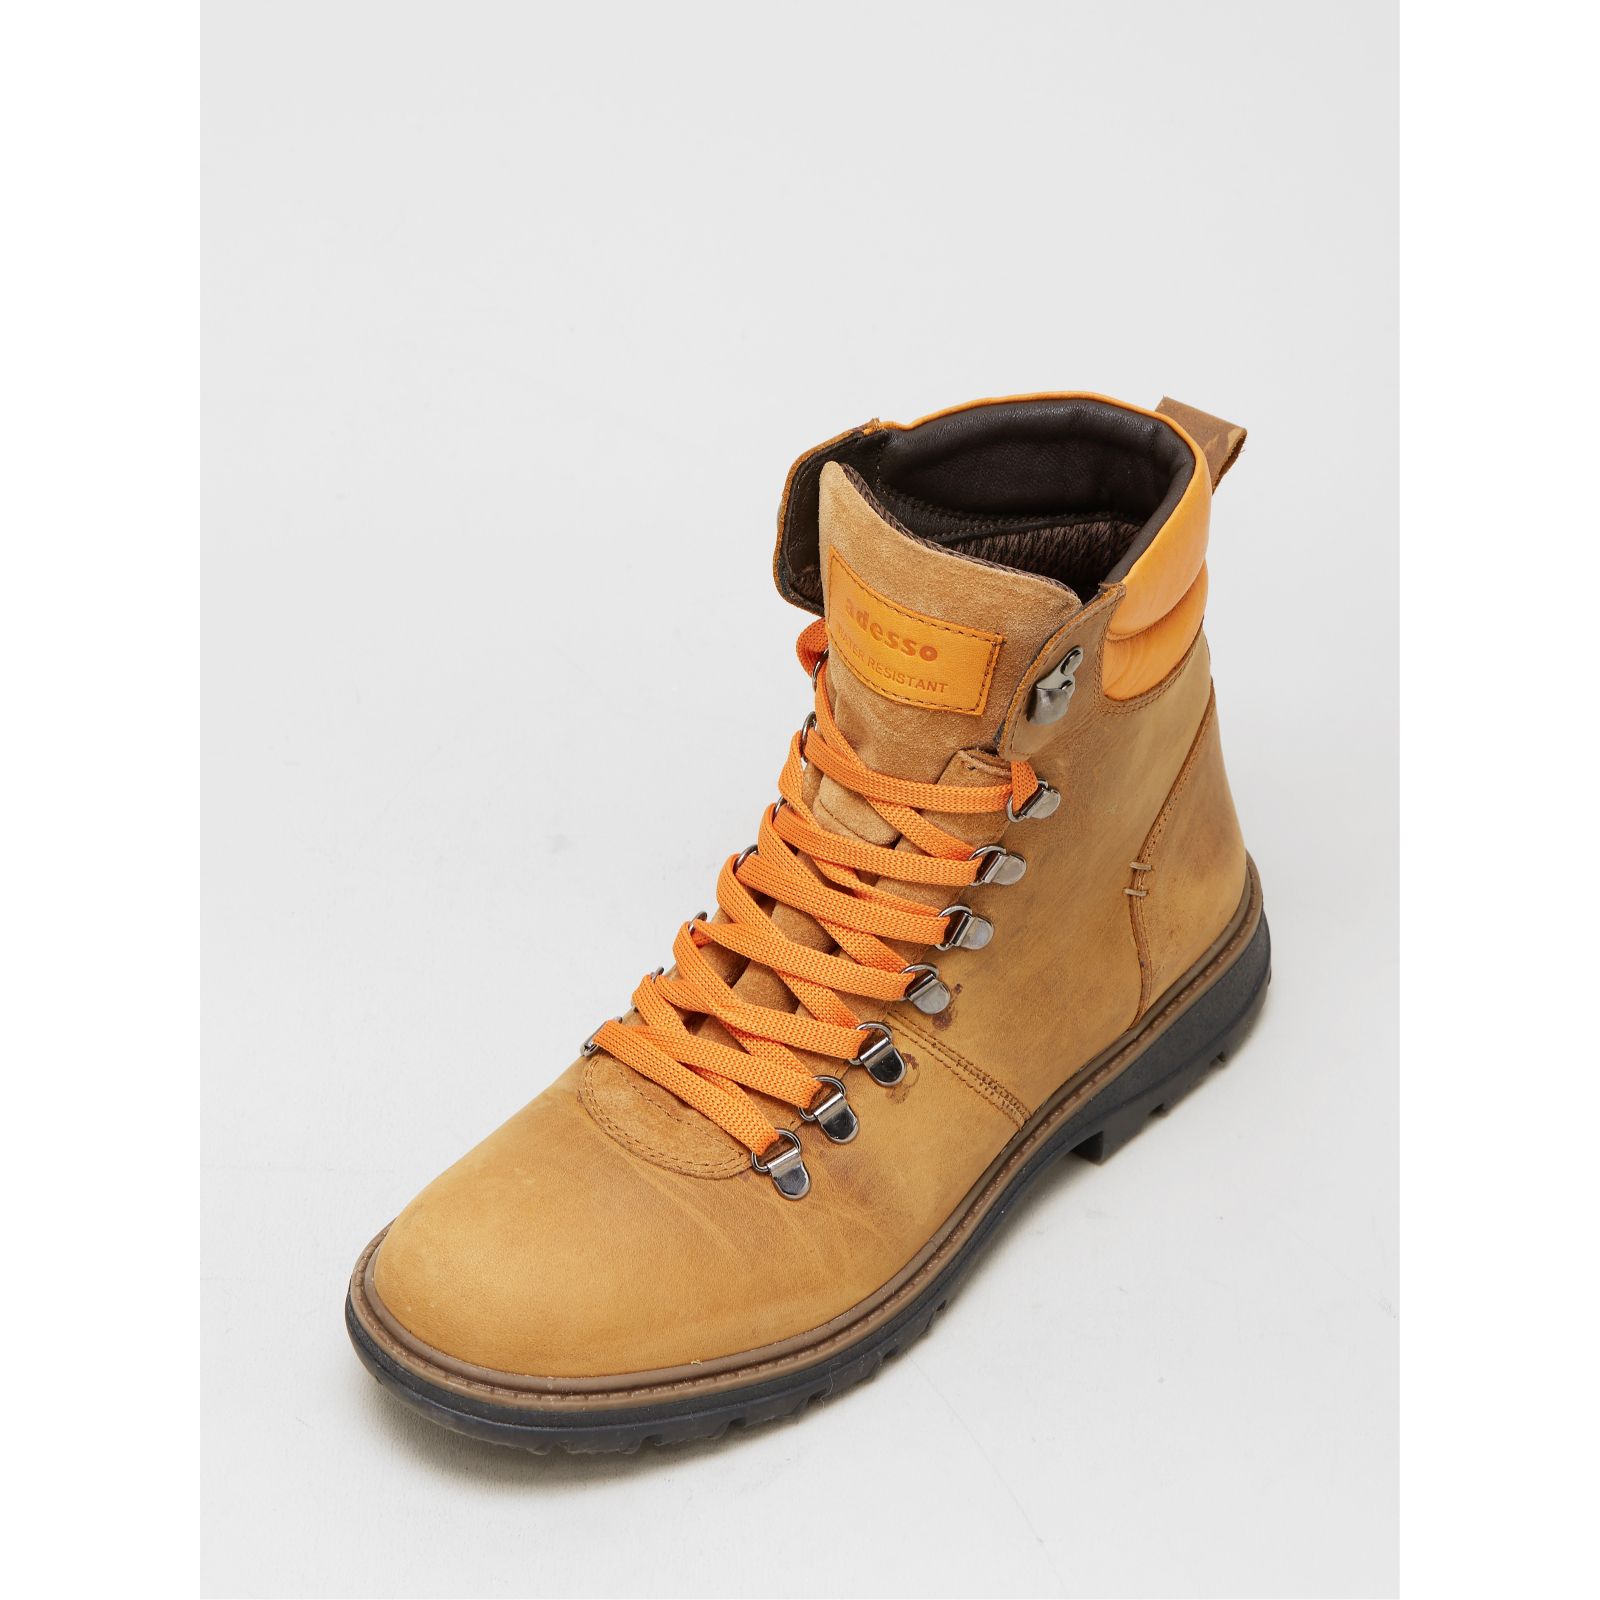 Adesso Marley Water Resistant Hiking Boot - QVC UK